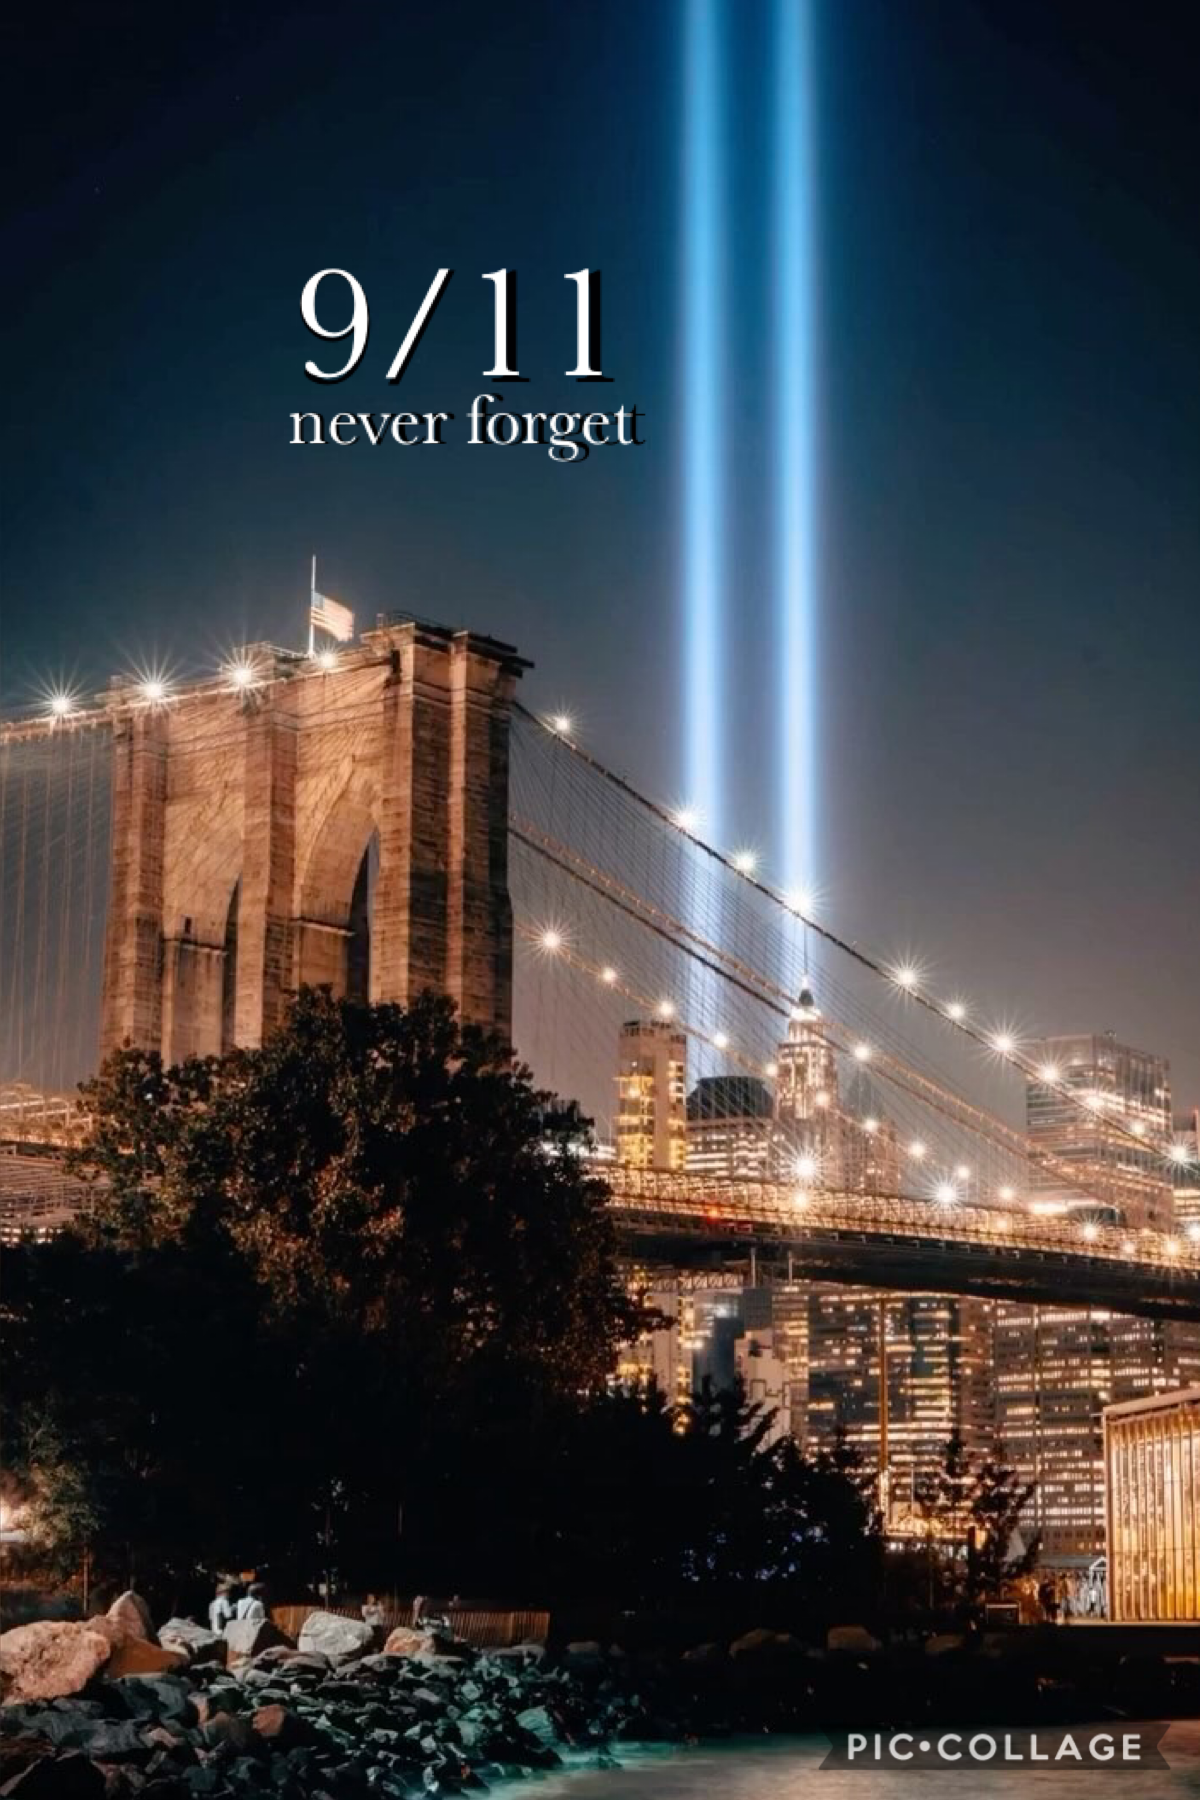 💔tap💔
Every year I always post a tribute to all the lives lost during the 9/11 attack on the twin towers. I was never personally affected by it, but it always impacts me. Qotd: did you know someone impacted by this? 